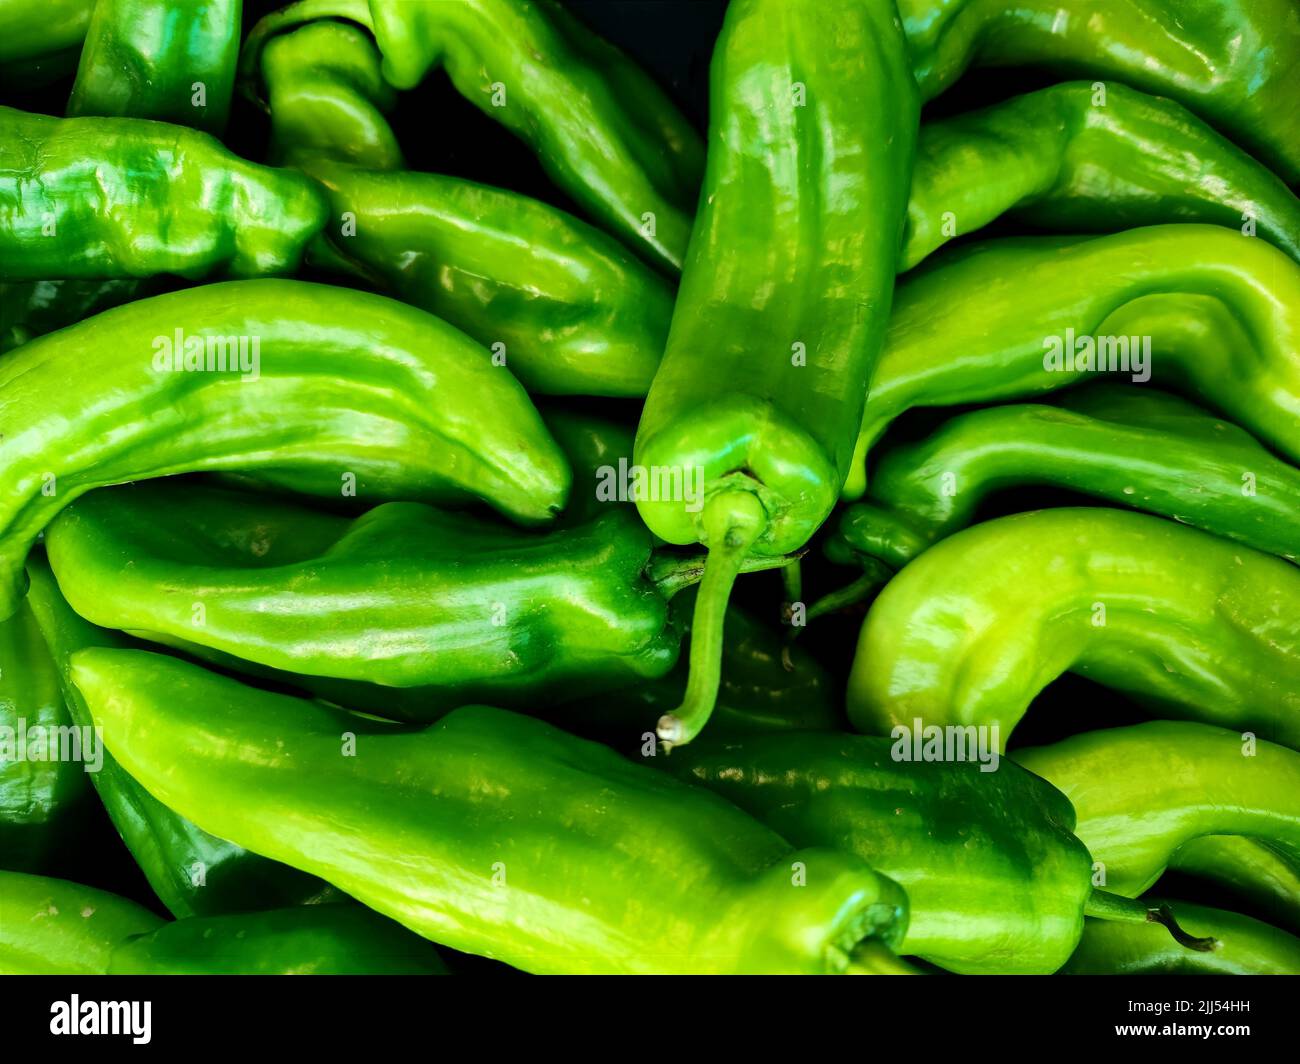 Pile of green peppers with black background. Great shot for restaurants, markets and designers. Stock Photo